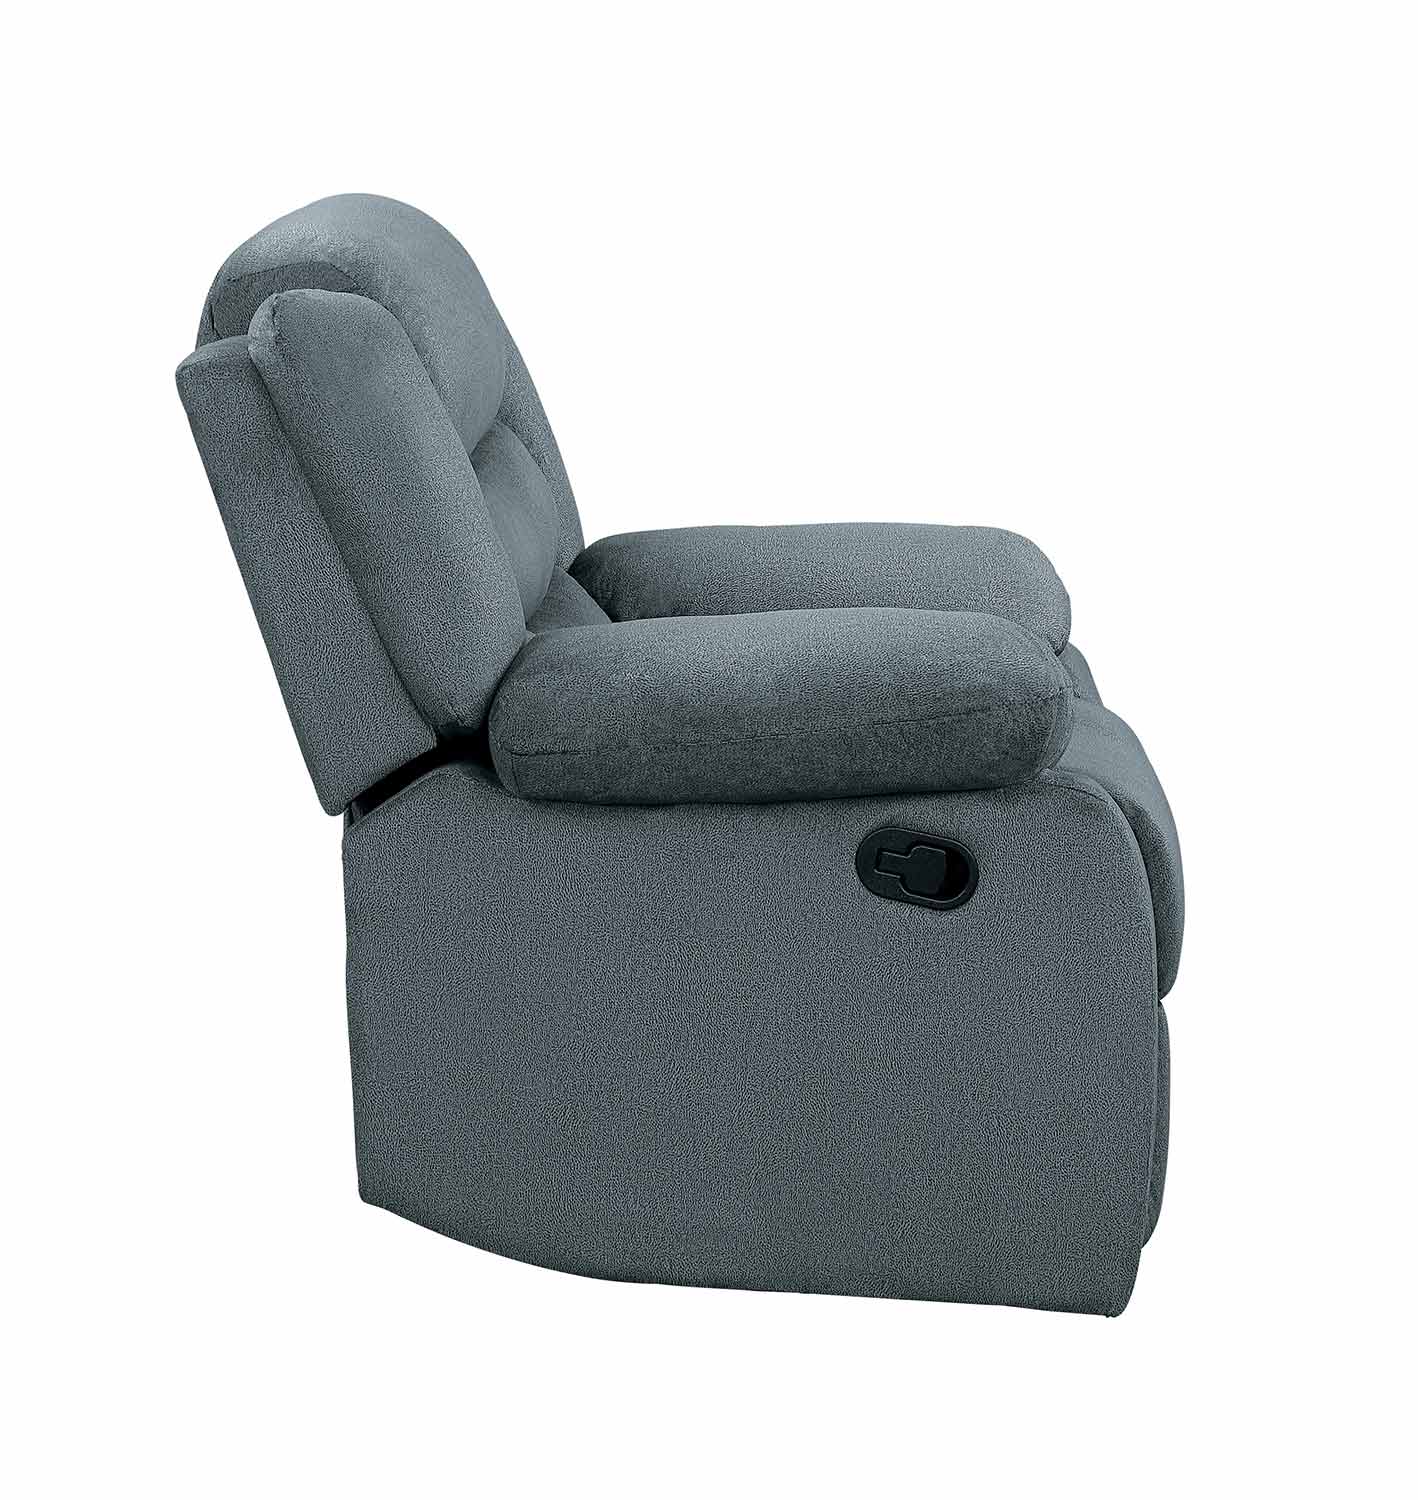 Homelegance Discus Reclining Chair - Gray